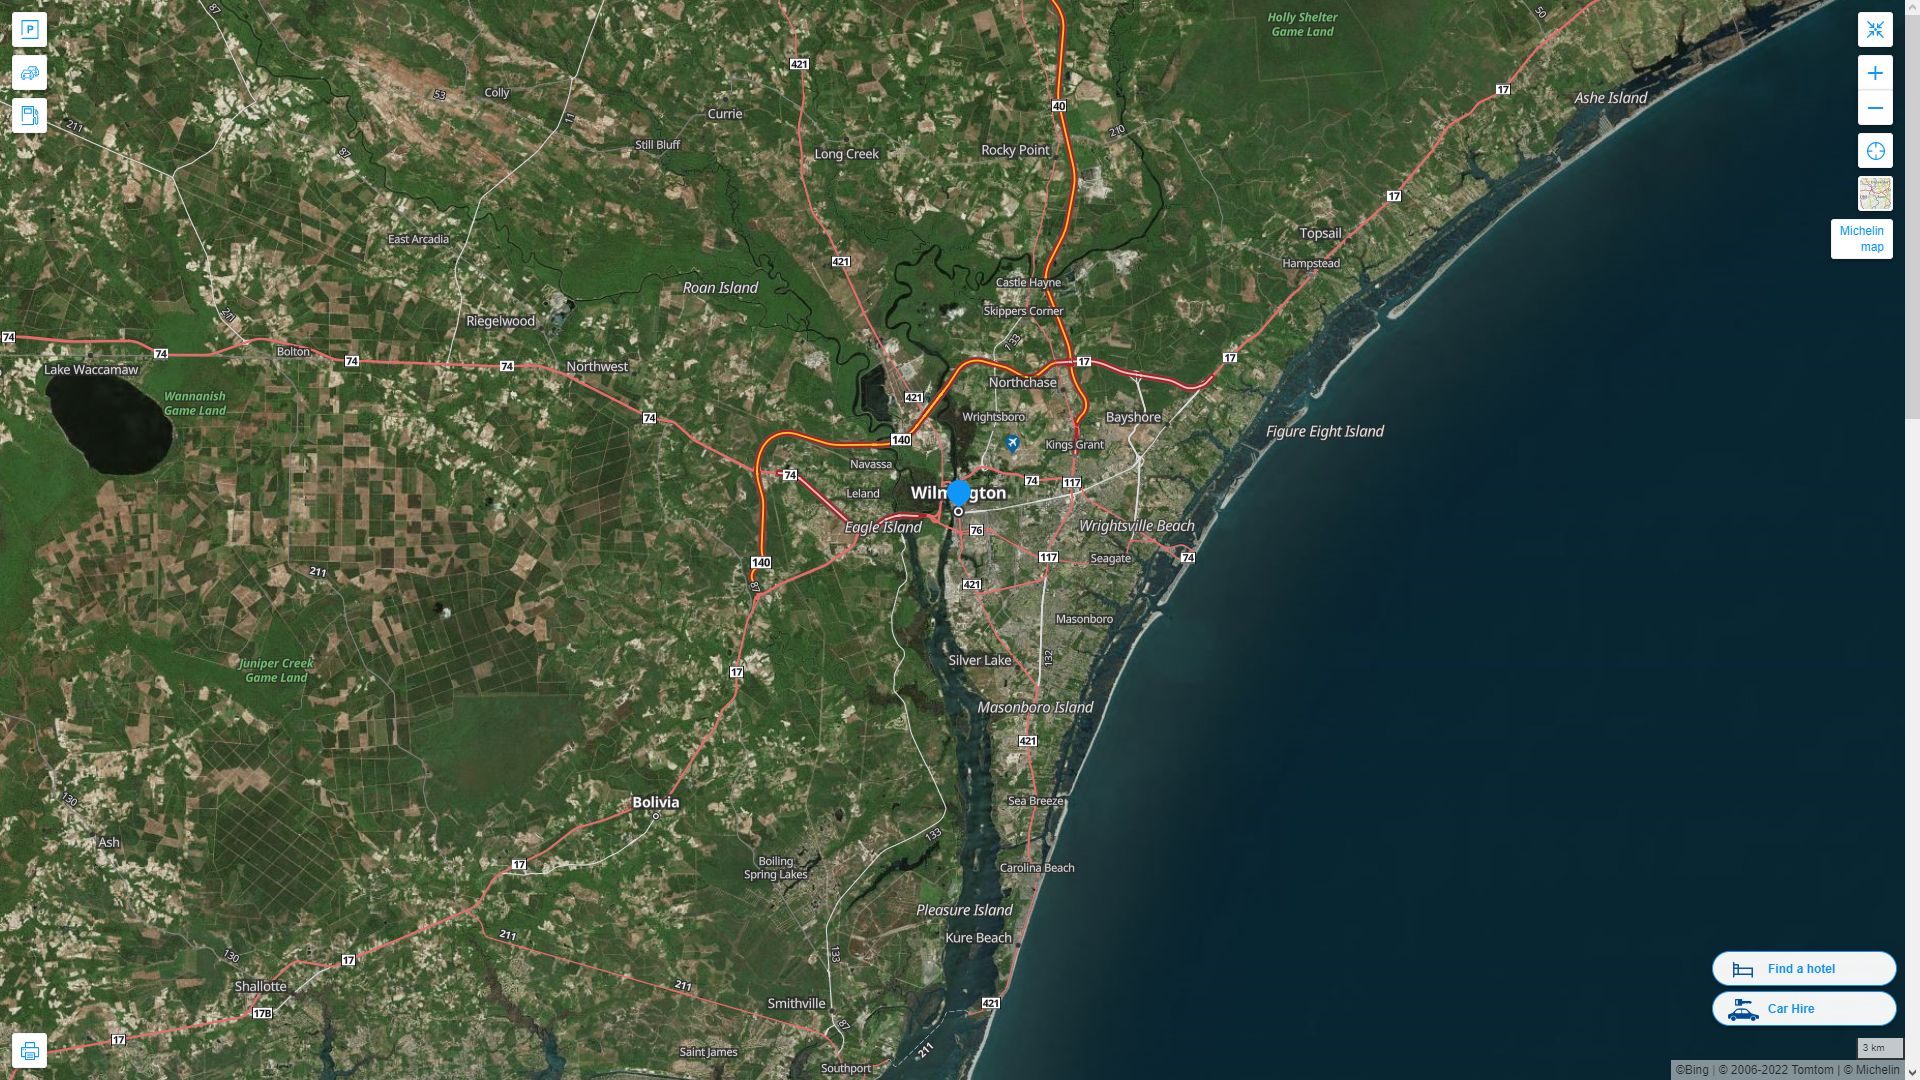 Wilmington North Carolina Highway and Road Map with Satellite View